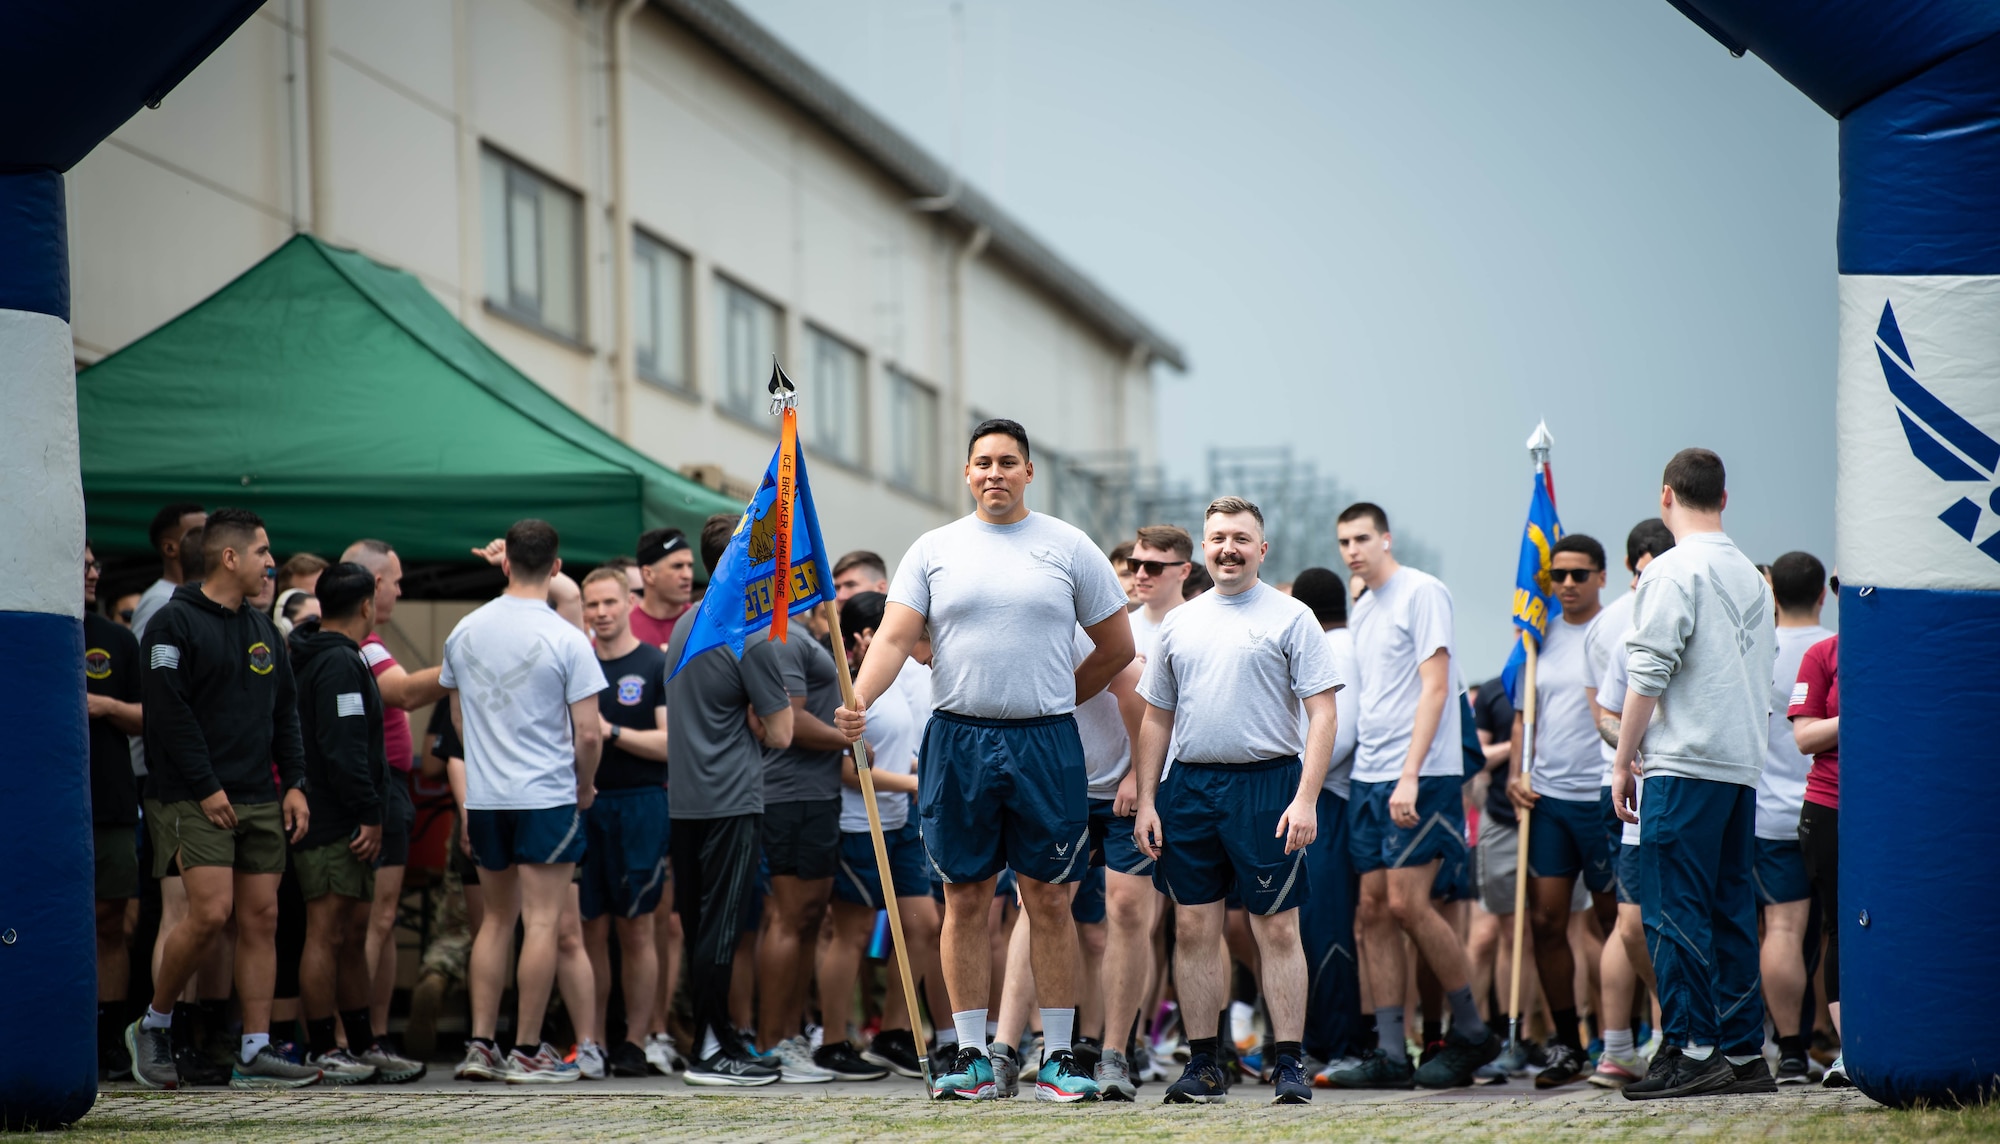 U.S. Air Force Senior Airman Roy Calatayud, center, 1st Combat Communications Squadron communications security responsible officer, and Senior Airman Charles Putnam, right of Calatayud, 721st Aircraft Maintenance Squadron avionics journeyman, stand at the starting line of a 5k during Police Week at Ramstein Air Base, Germany, May 15, 2023. During the week, the base held several events honoring Police Week including a Defender Challenge, 5K run and a final guardmount. (U.S. Air Force photo by Airman 1st Class Jared Lovett)